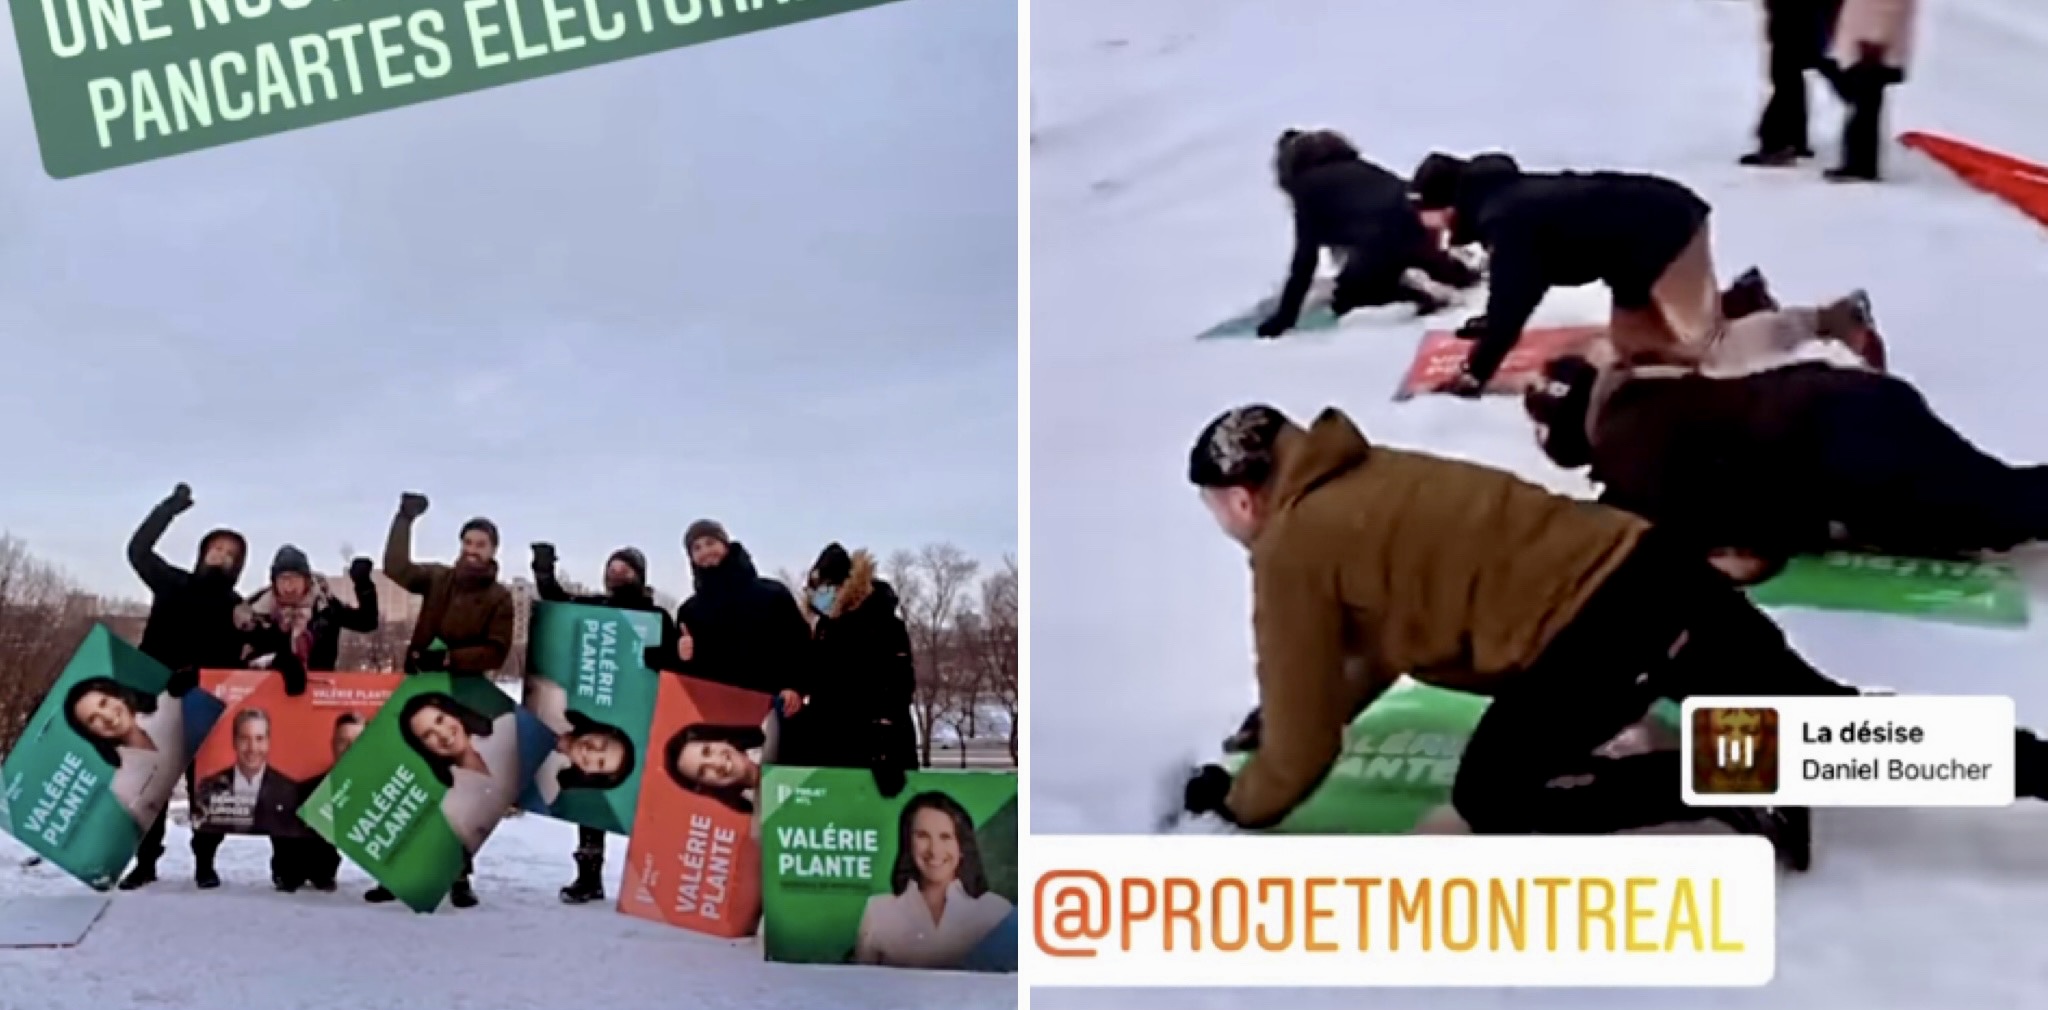 Projet Montréal took their election signs sledding on Mount Royal